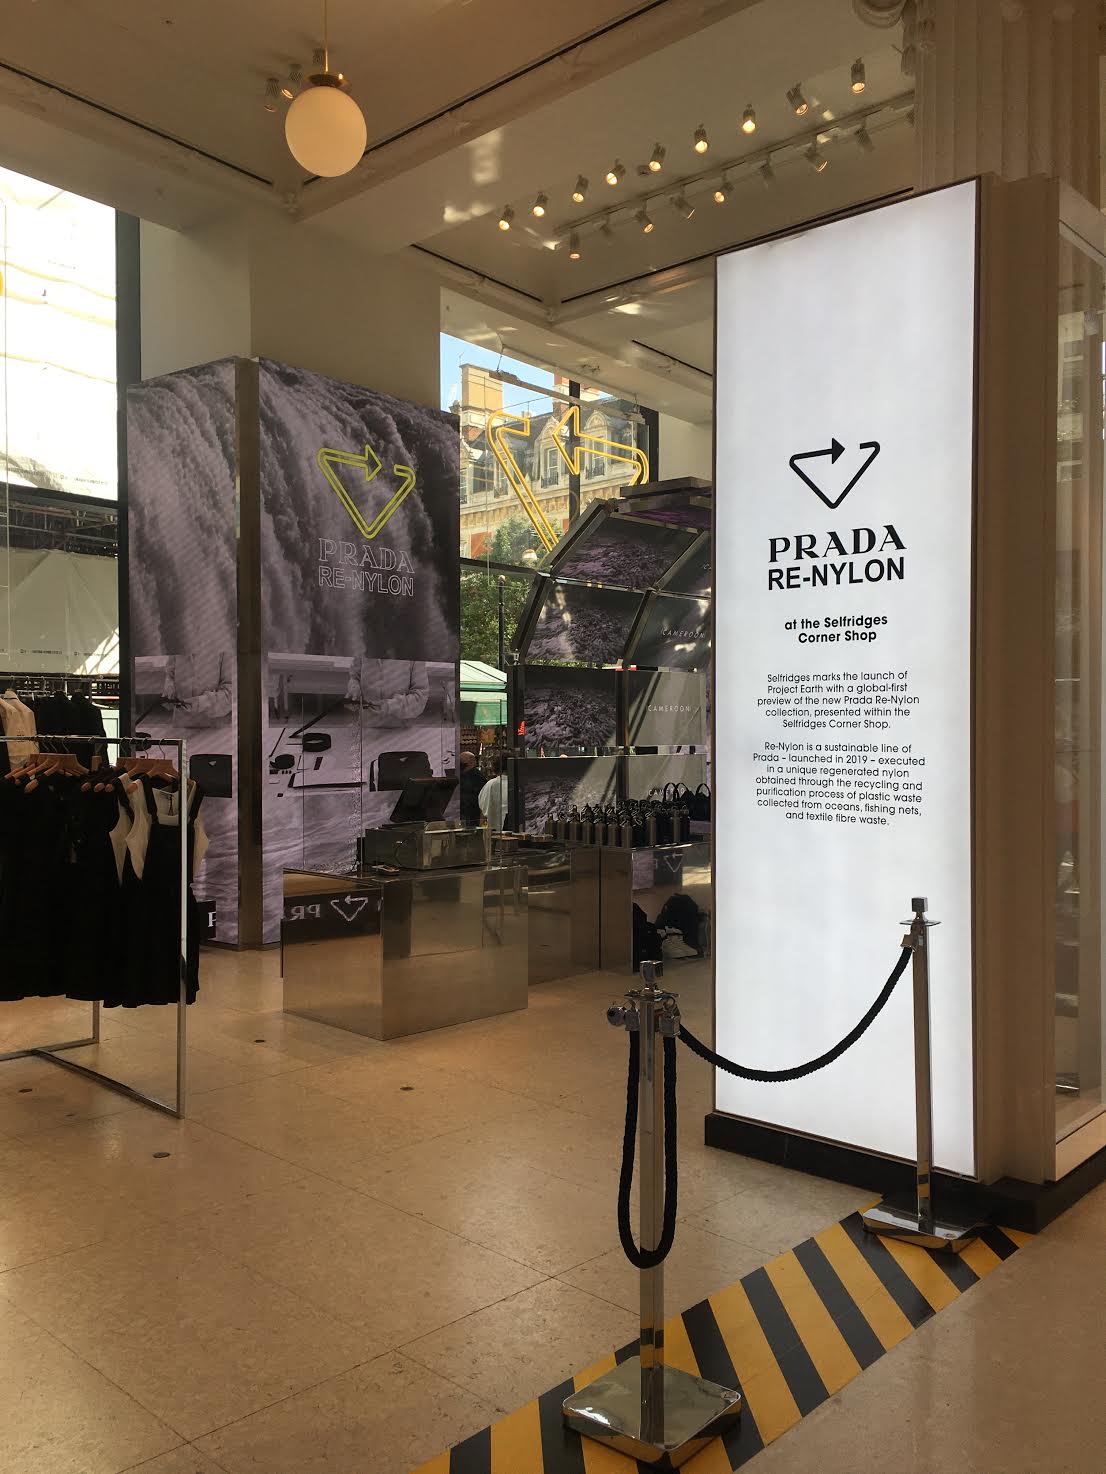 Prada Re-Nylon Brings Sustainability to the Brand's Most